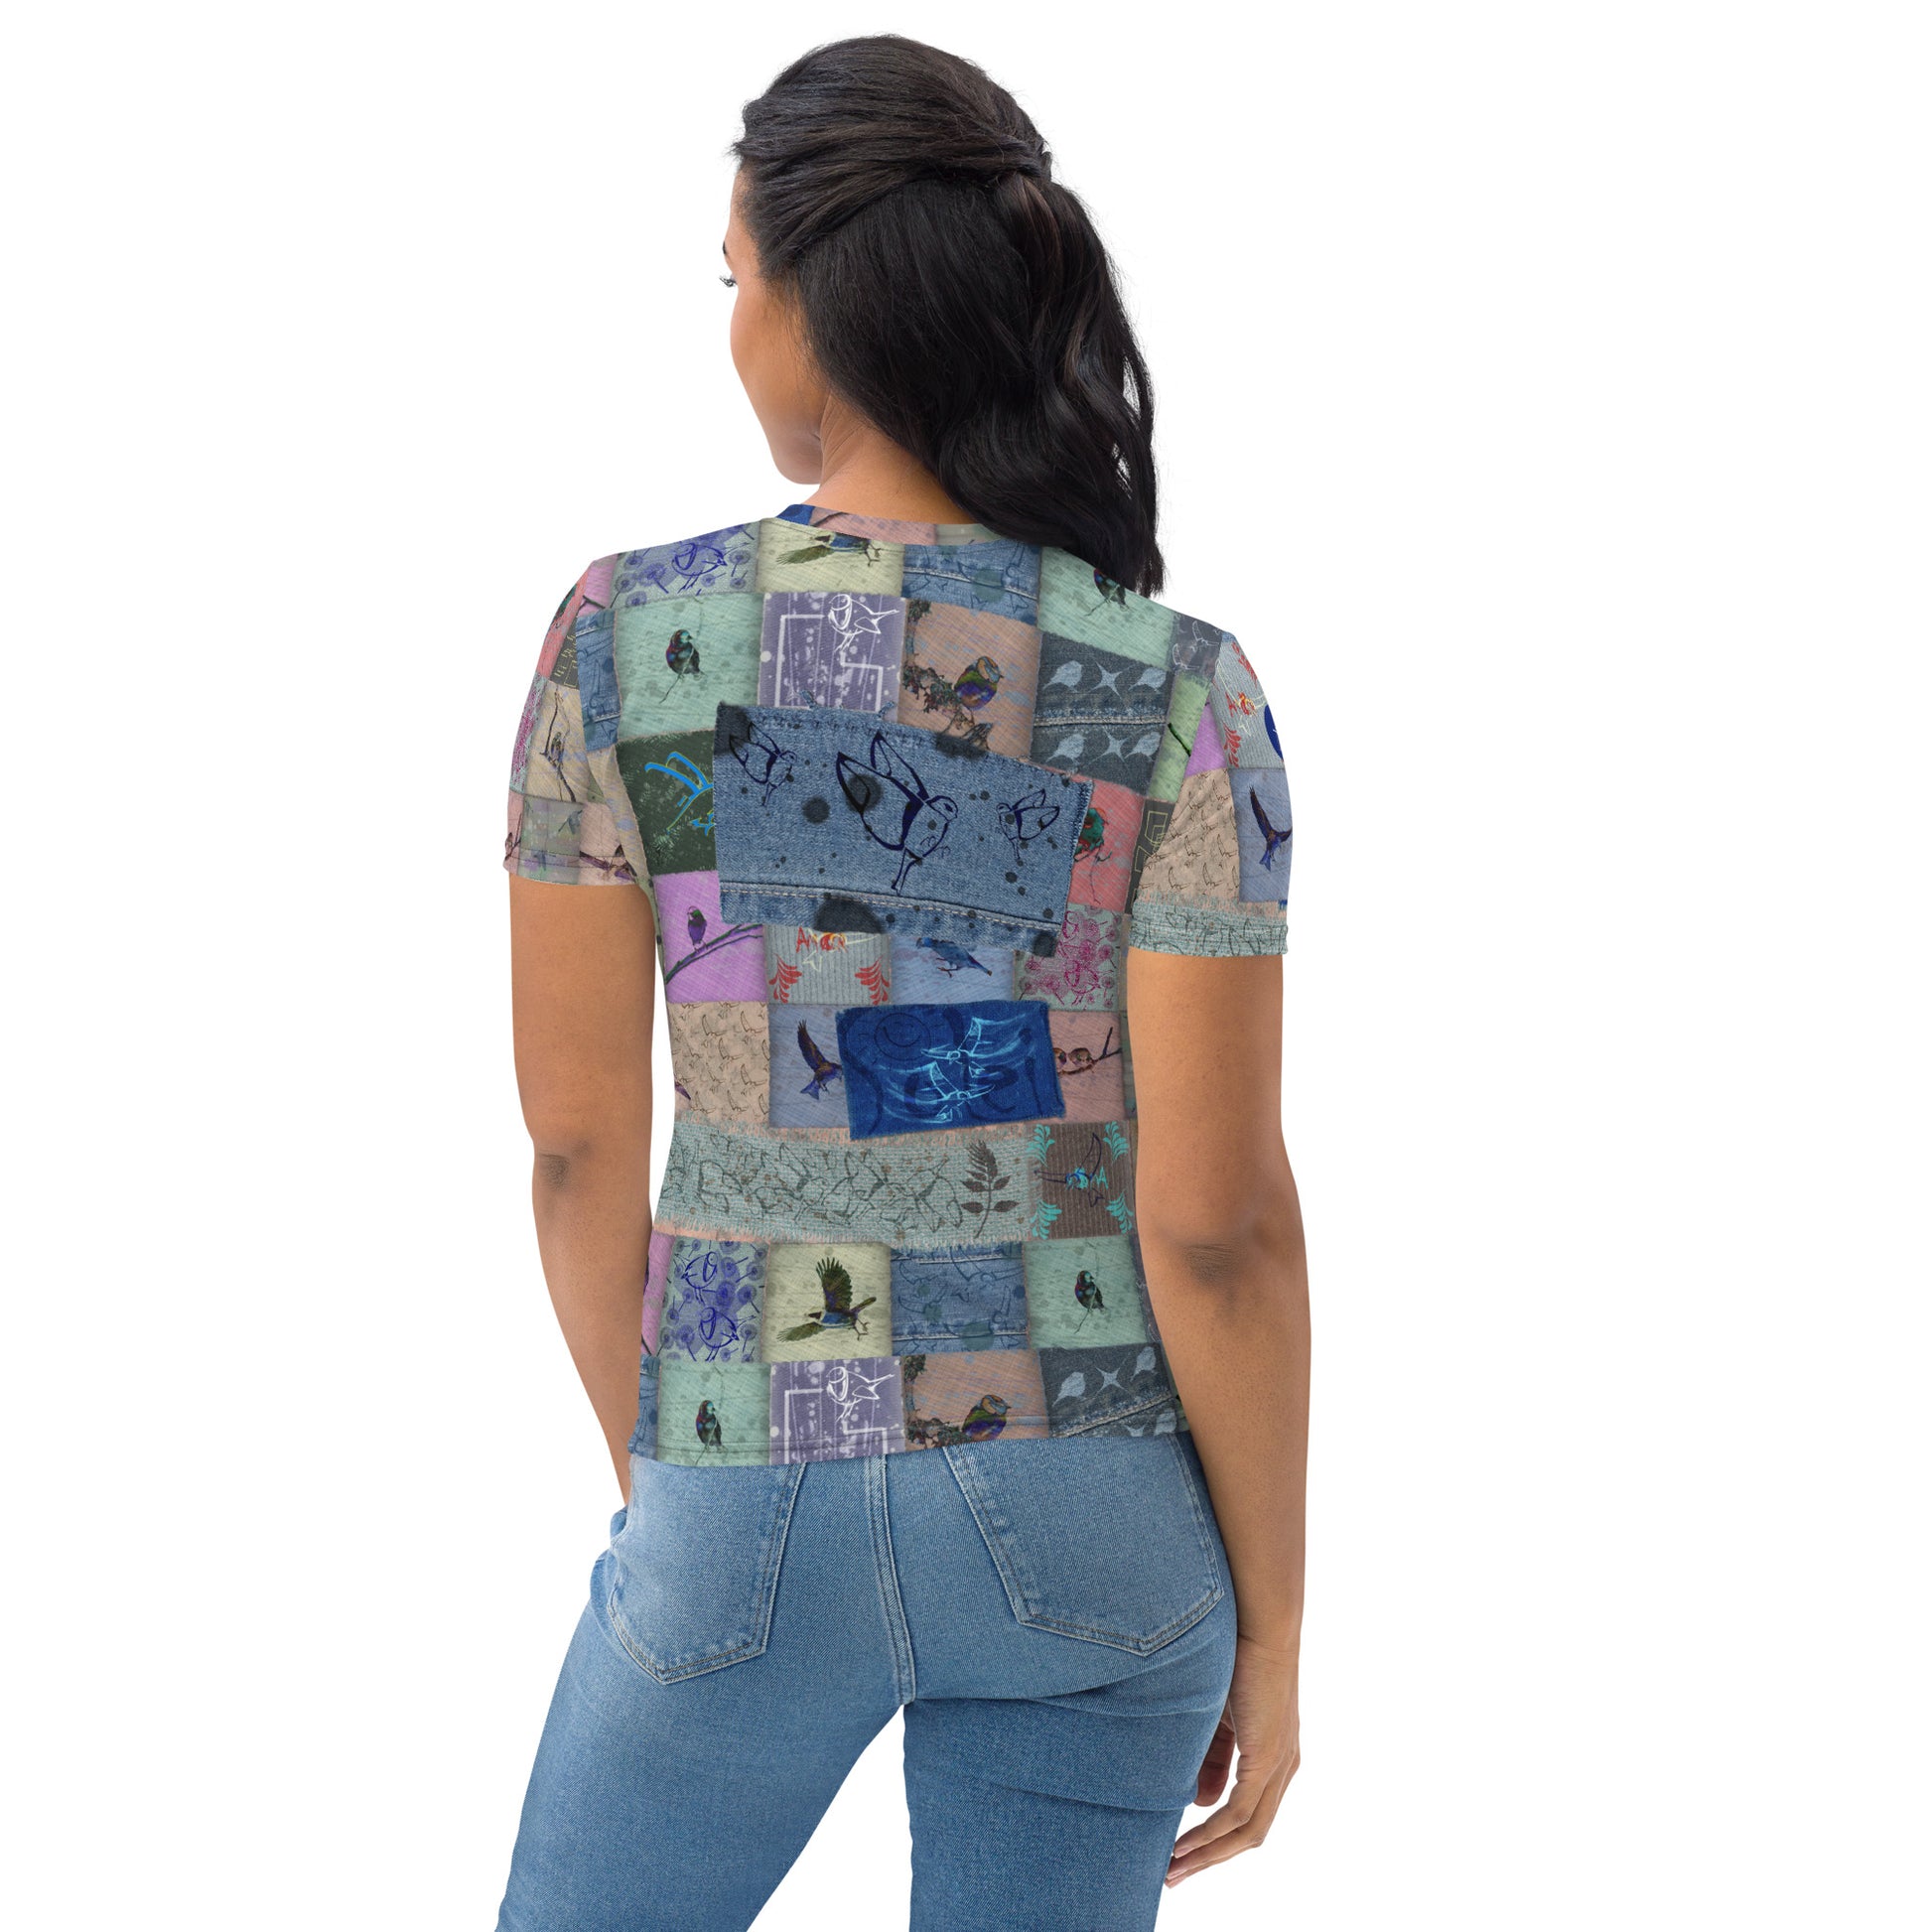 t-shirt jomelo patchwork